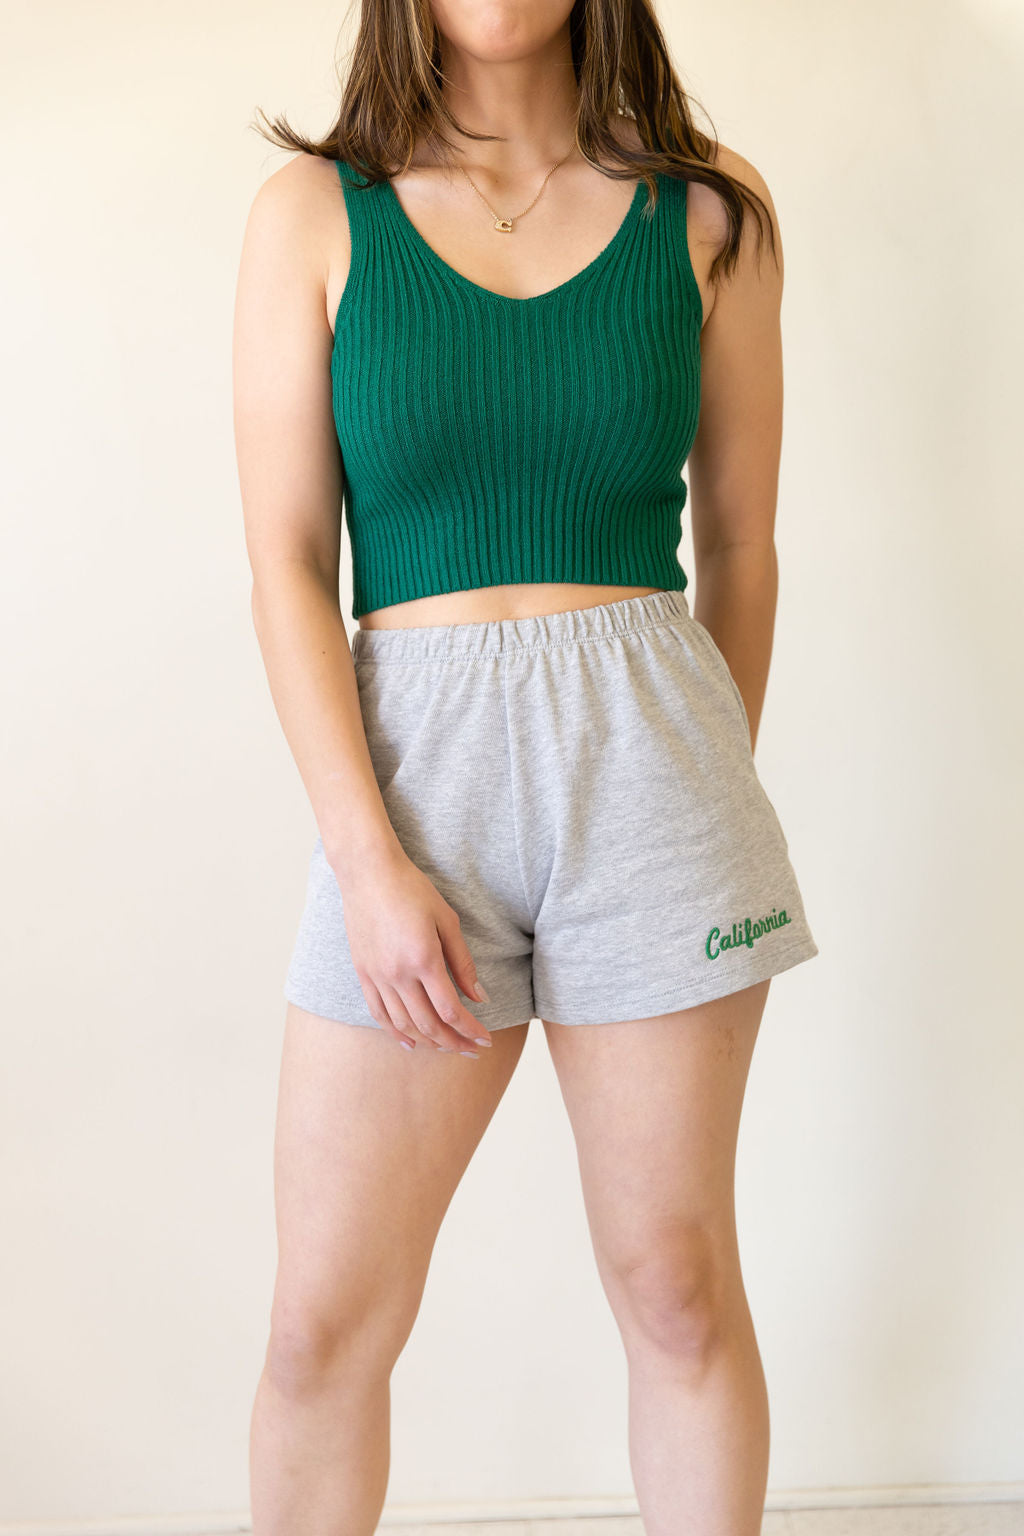 California Living Embroidered Shorts